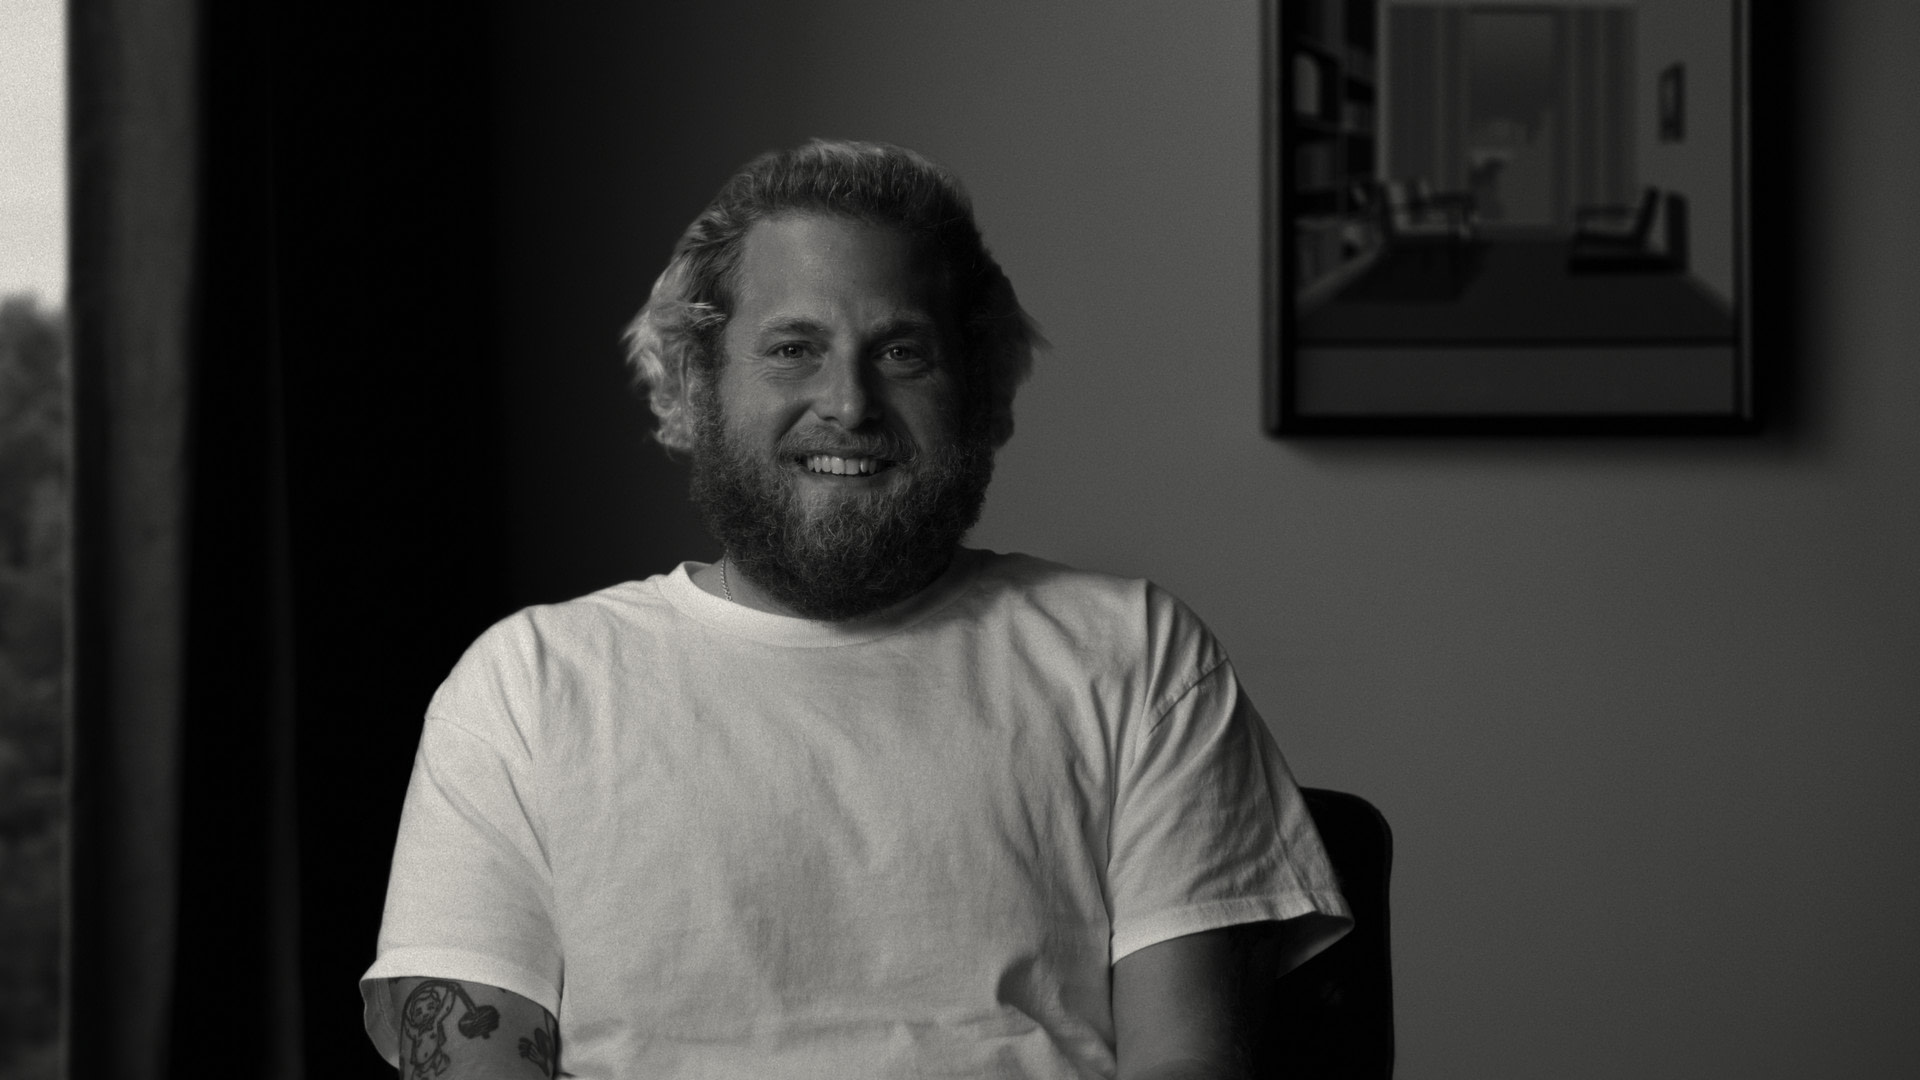 A black and white image of a bearded man (Jonah Hill) smiling and sitting in a chair against a blank wall with a portrait of an office hanging.